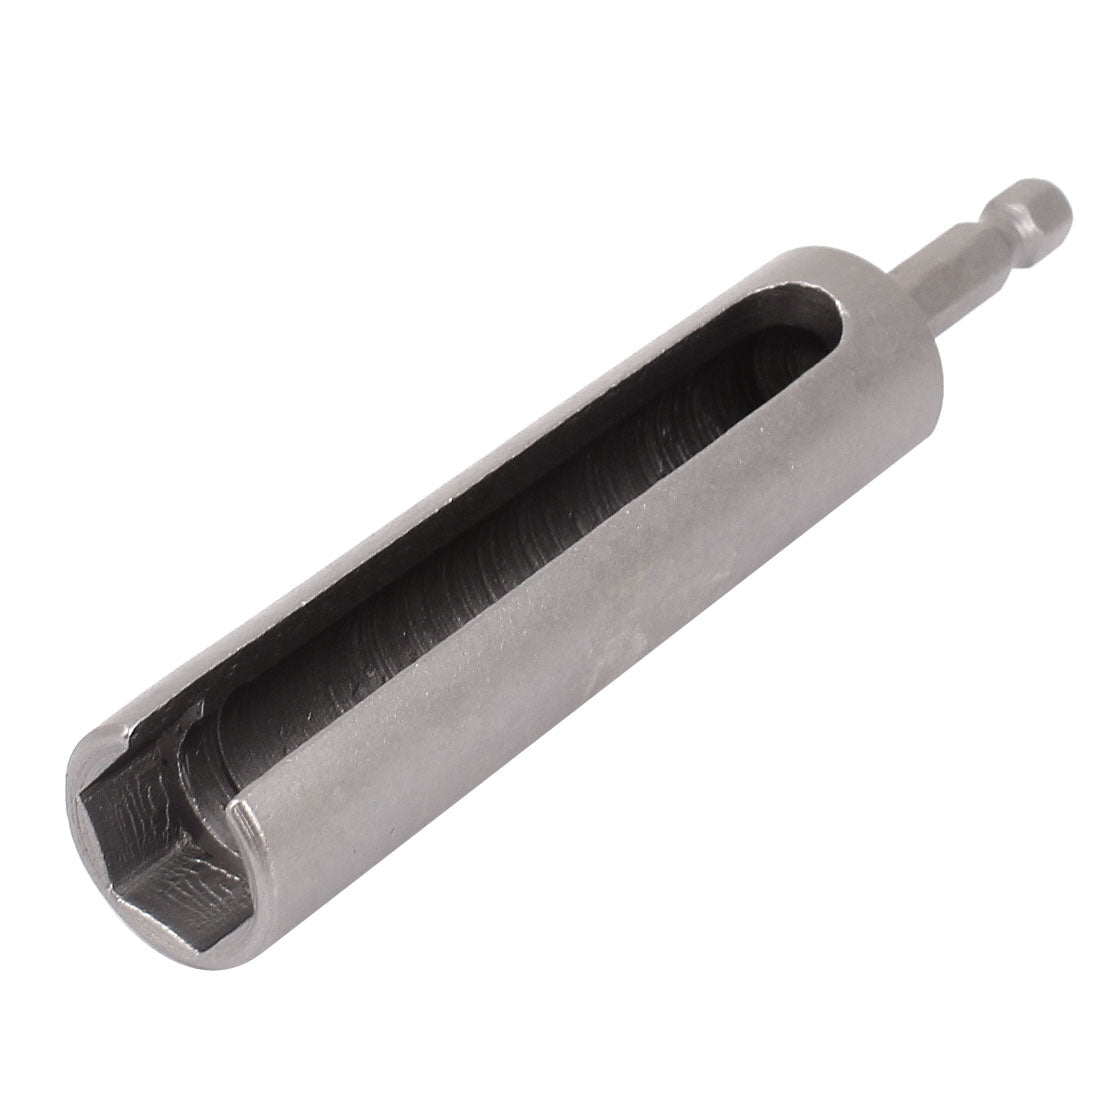 uxcell Uxcell Gray Hex Shank 14mm Hexagon Nut Socket Slotted Extension Driver Bit 5"